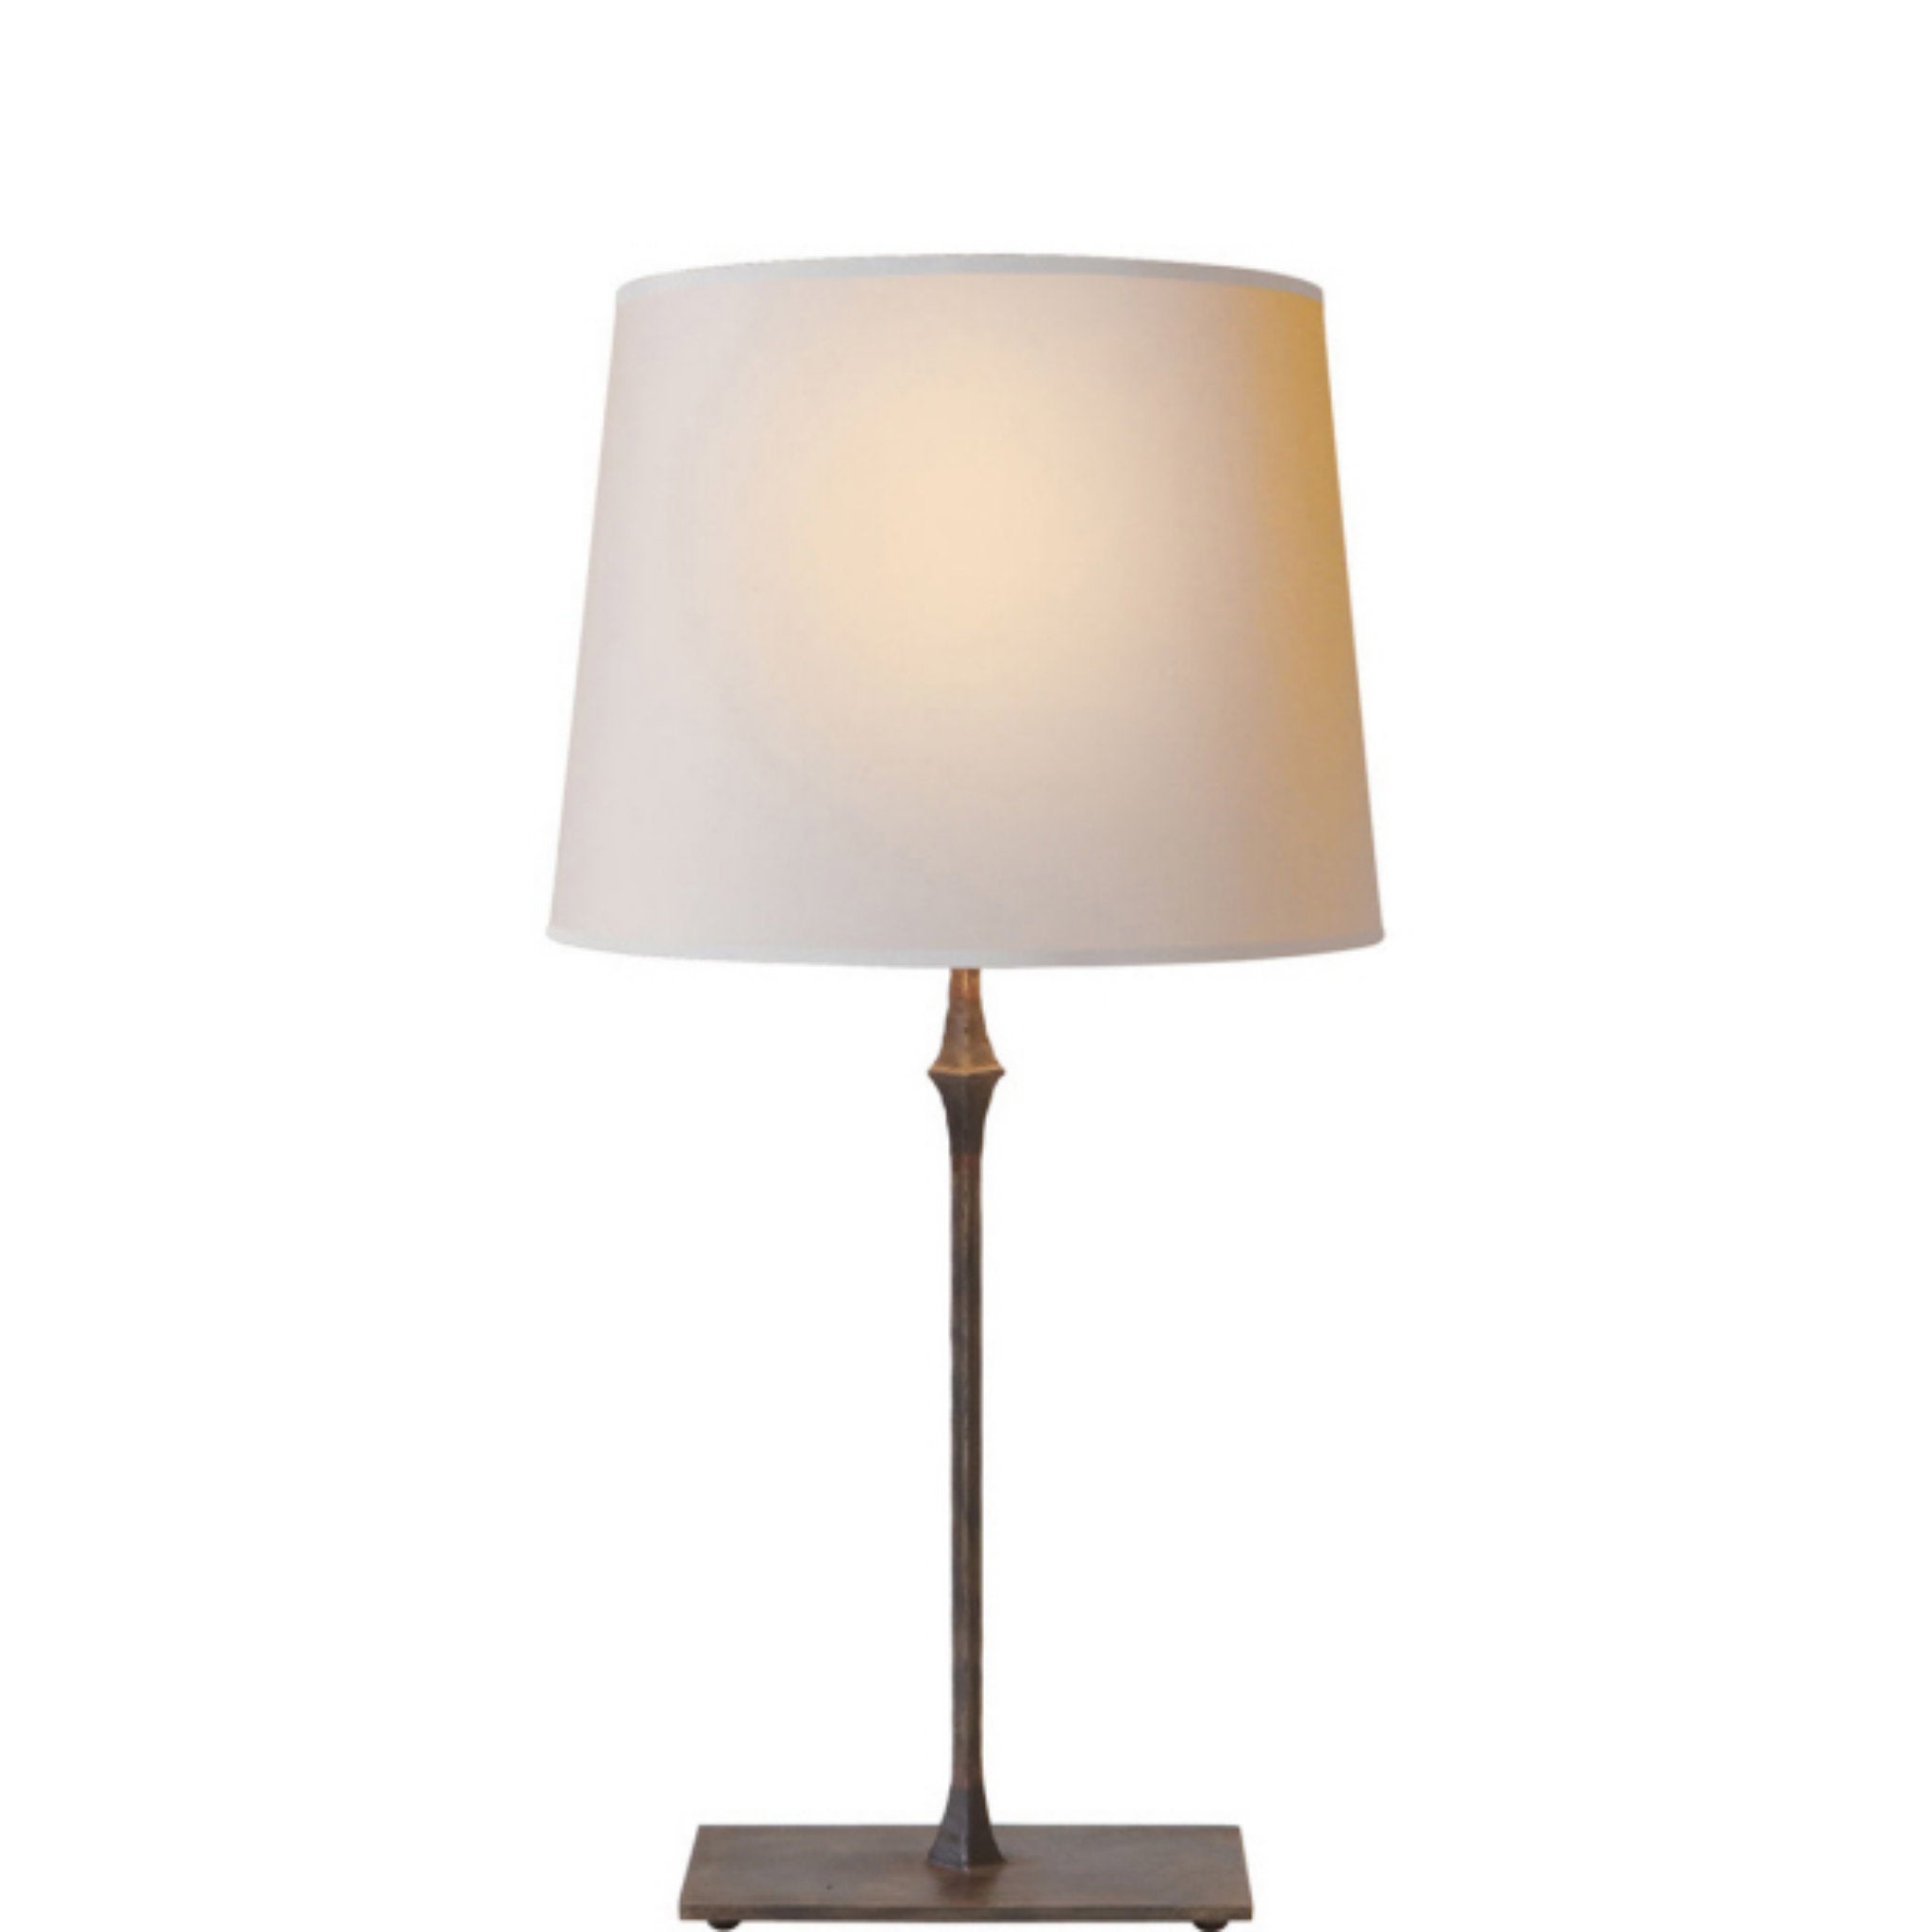 Pair of Crescent Table Lamp from Visual Comfort by Michael S Smith